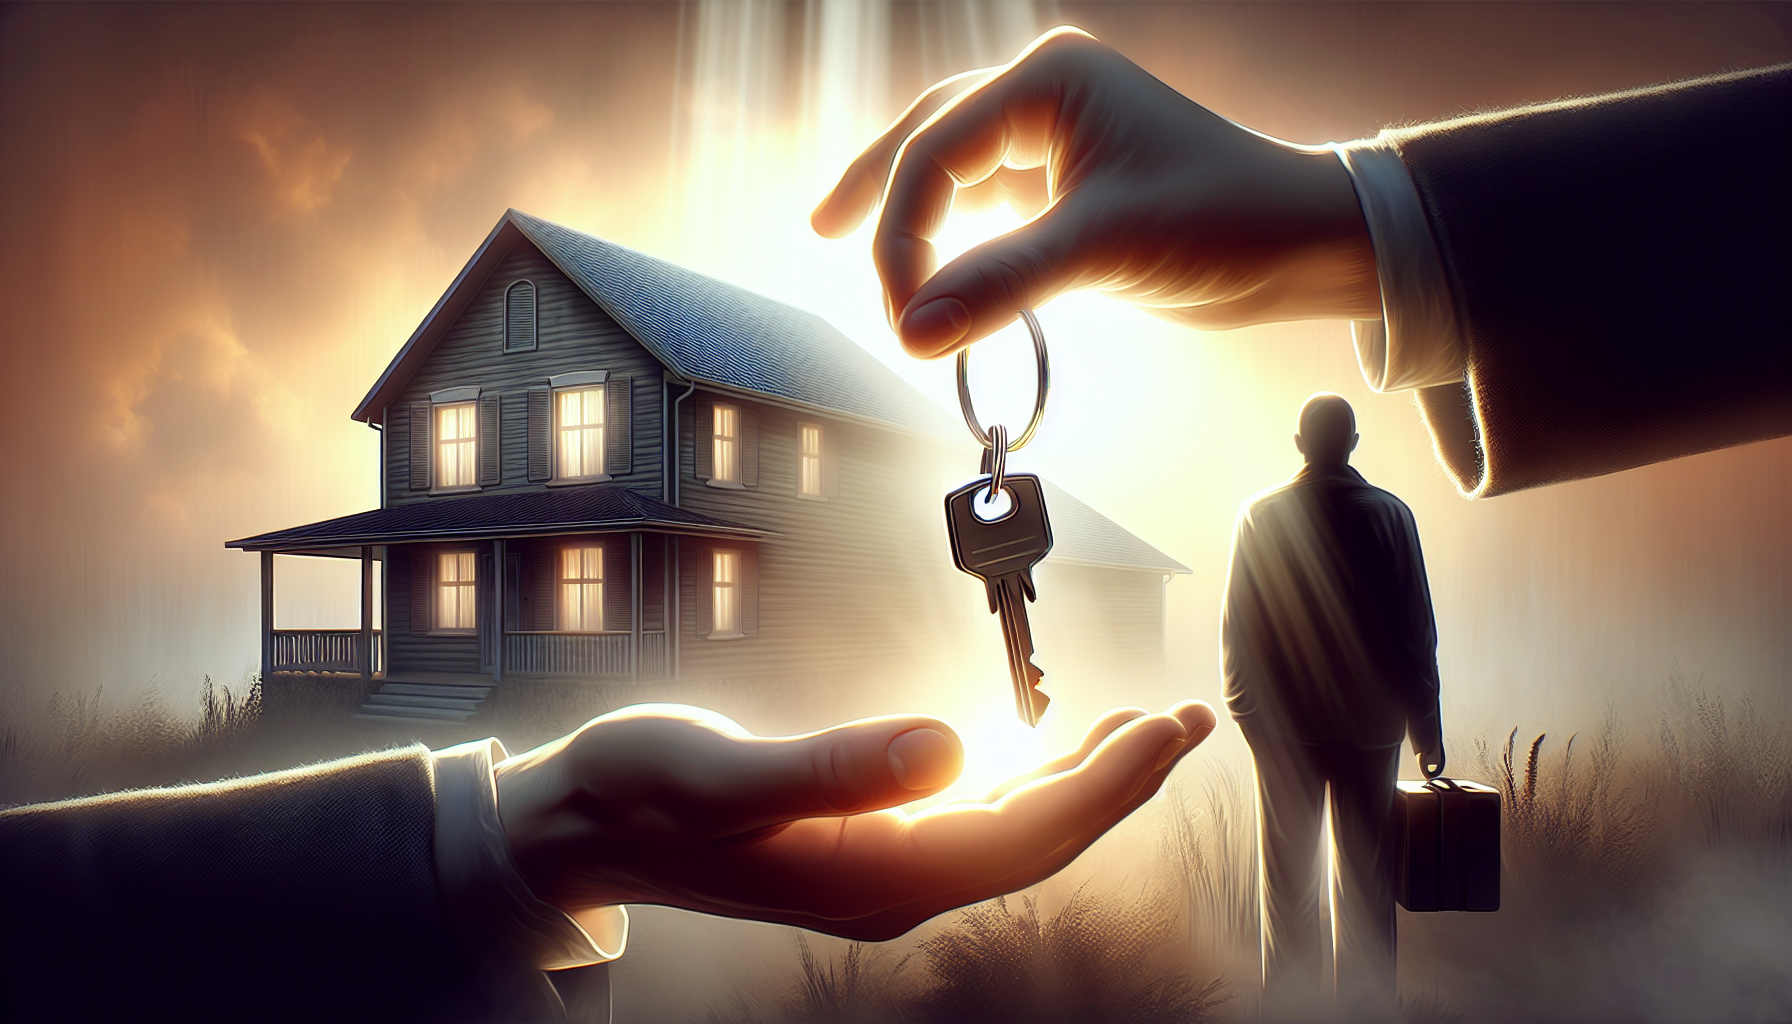 Illustration of a homeowner handing over house keys, symbolizing deed in lieu of foreclosure